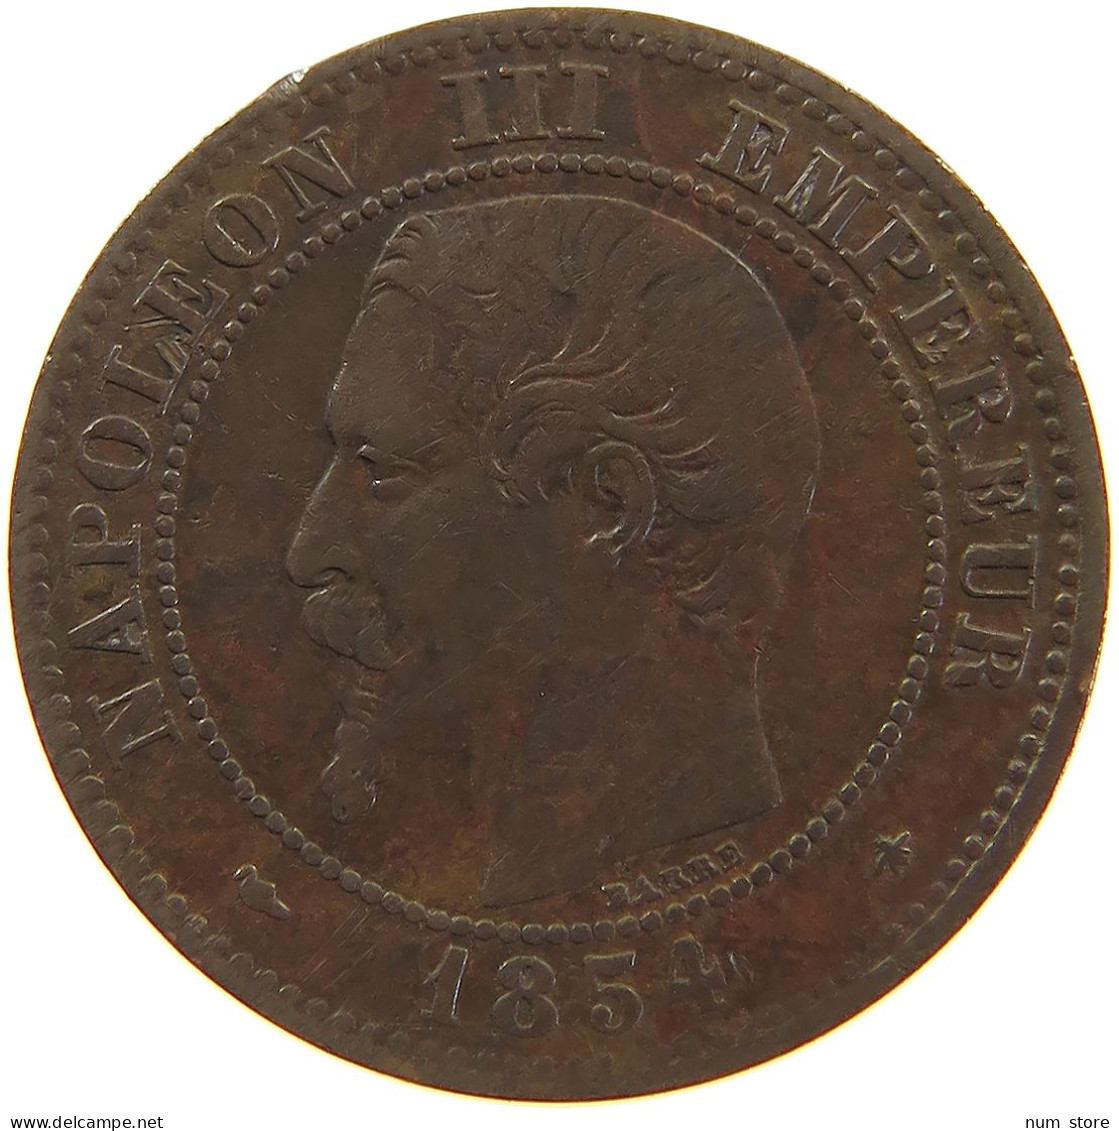 FRANCE 2 CENTIMES 1854 BB Napoleon III. (1852-1870) #a059 0175 - 2 Centimes